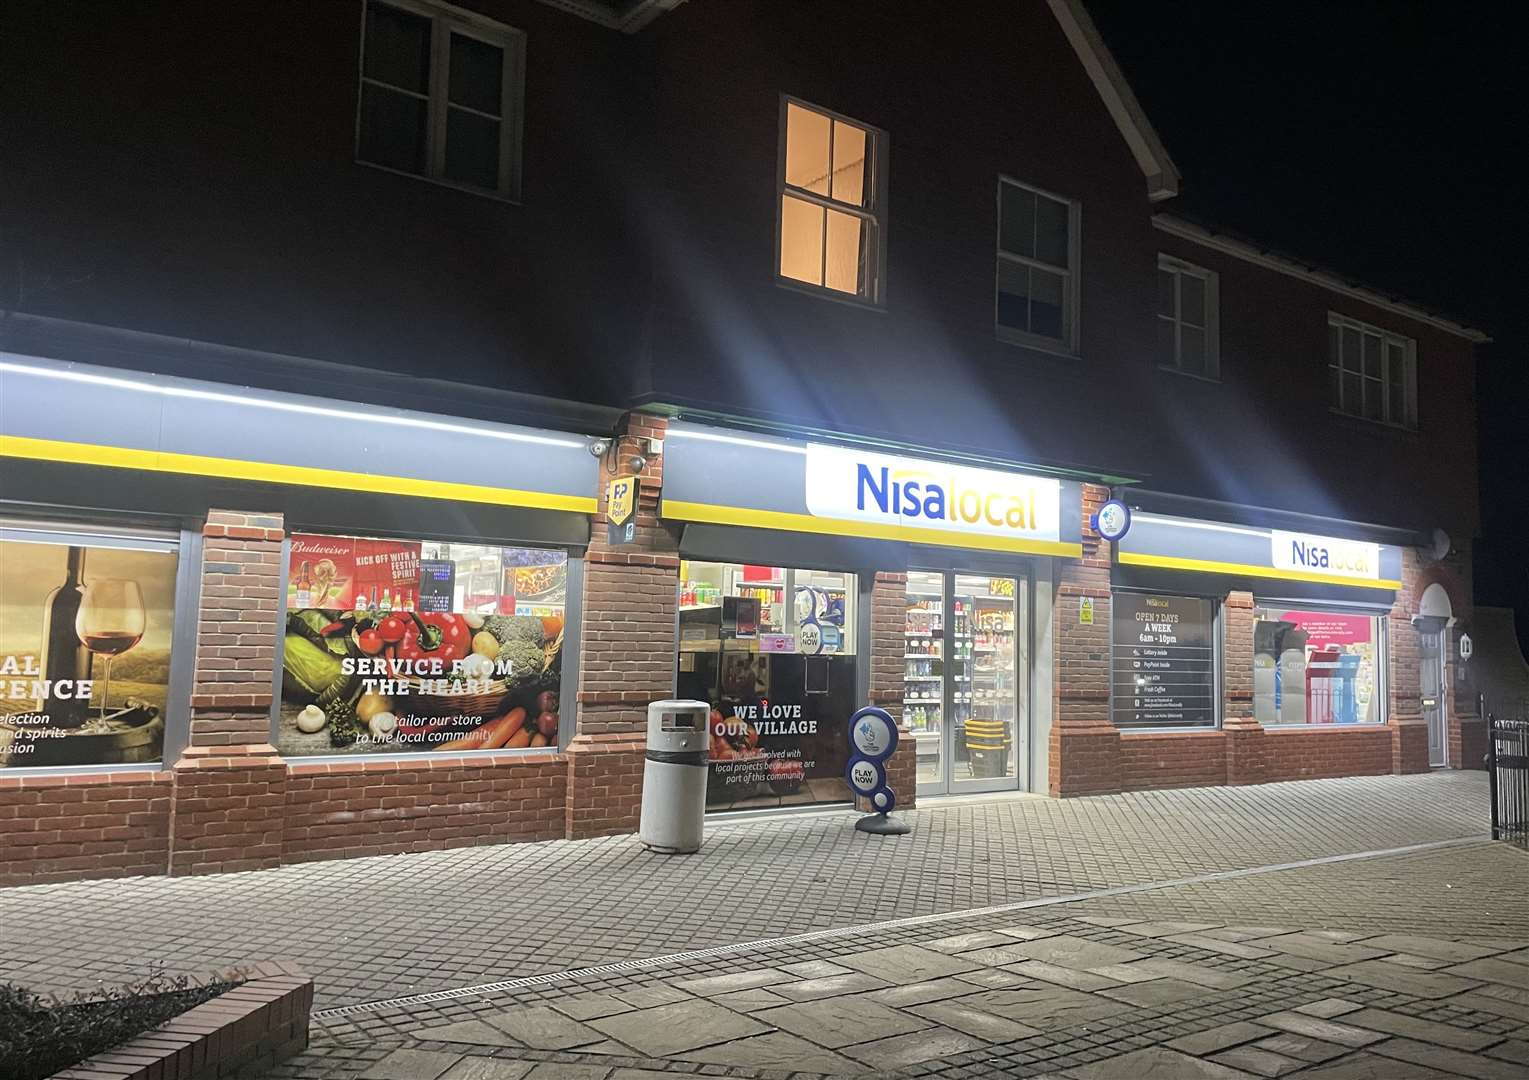 Iwade Londis, which has the exterior of a NisaLocal